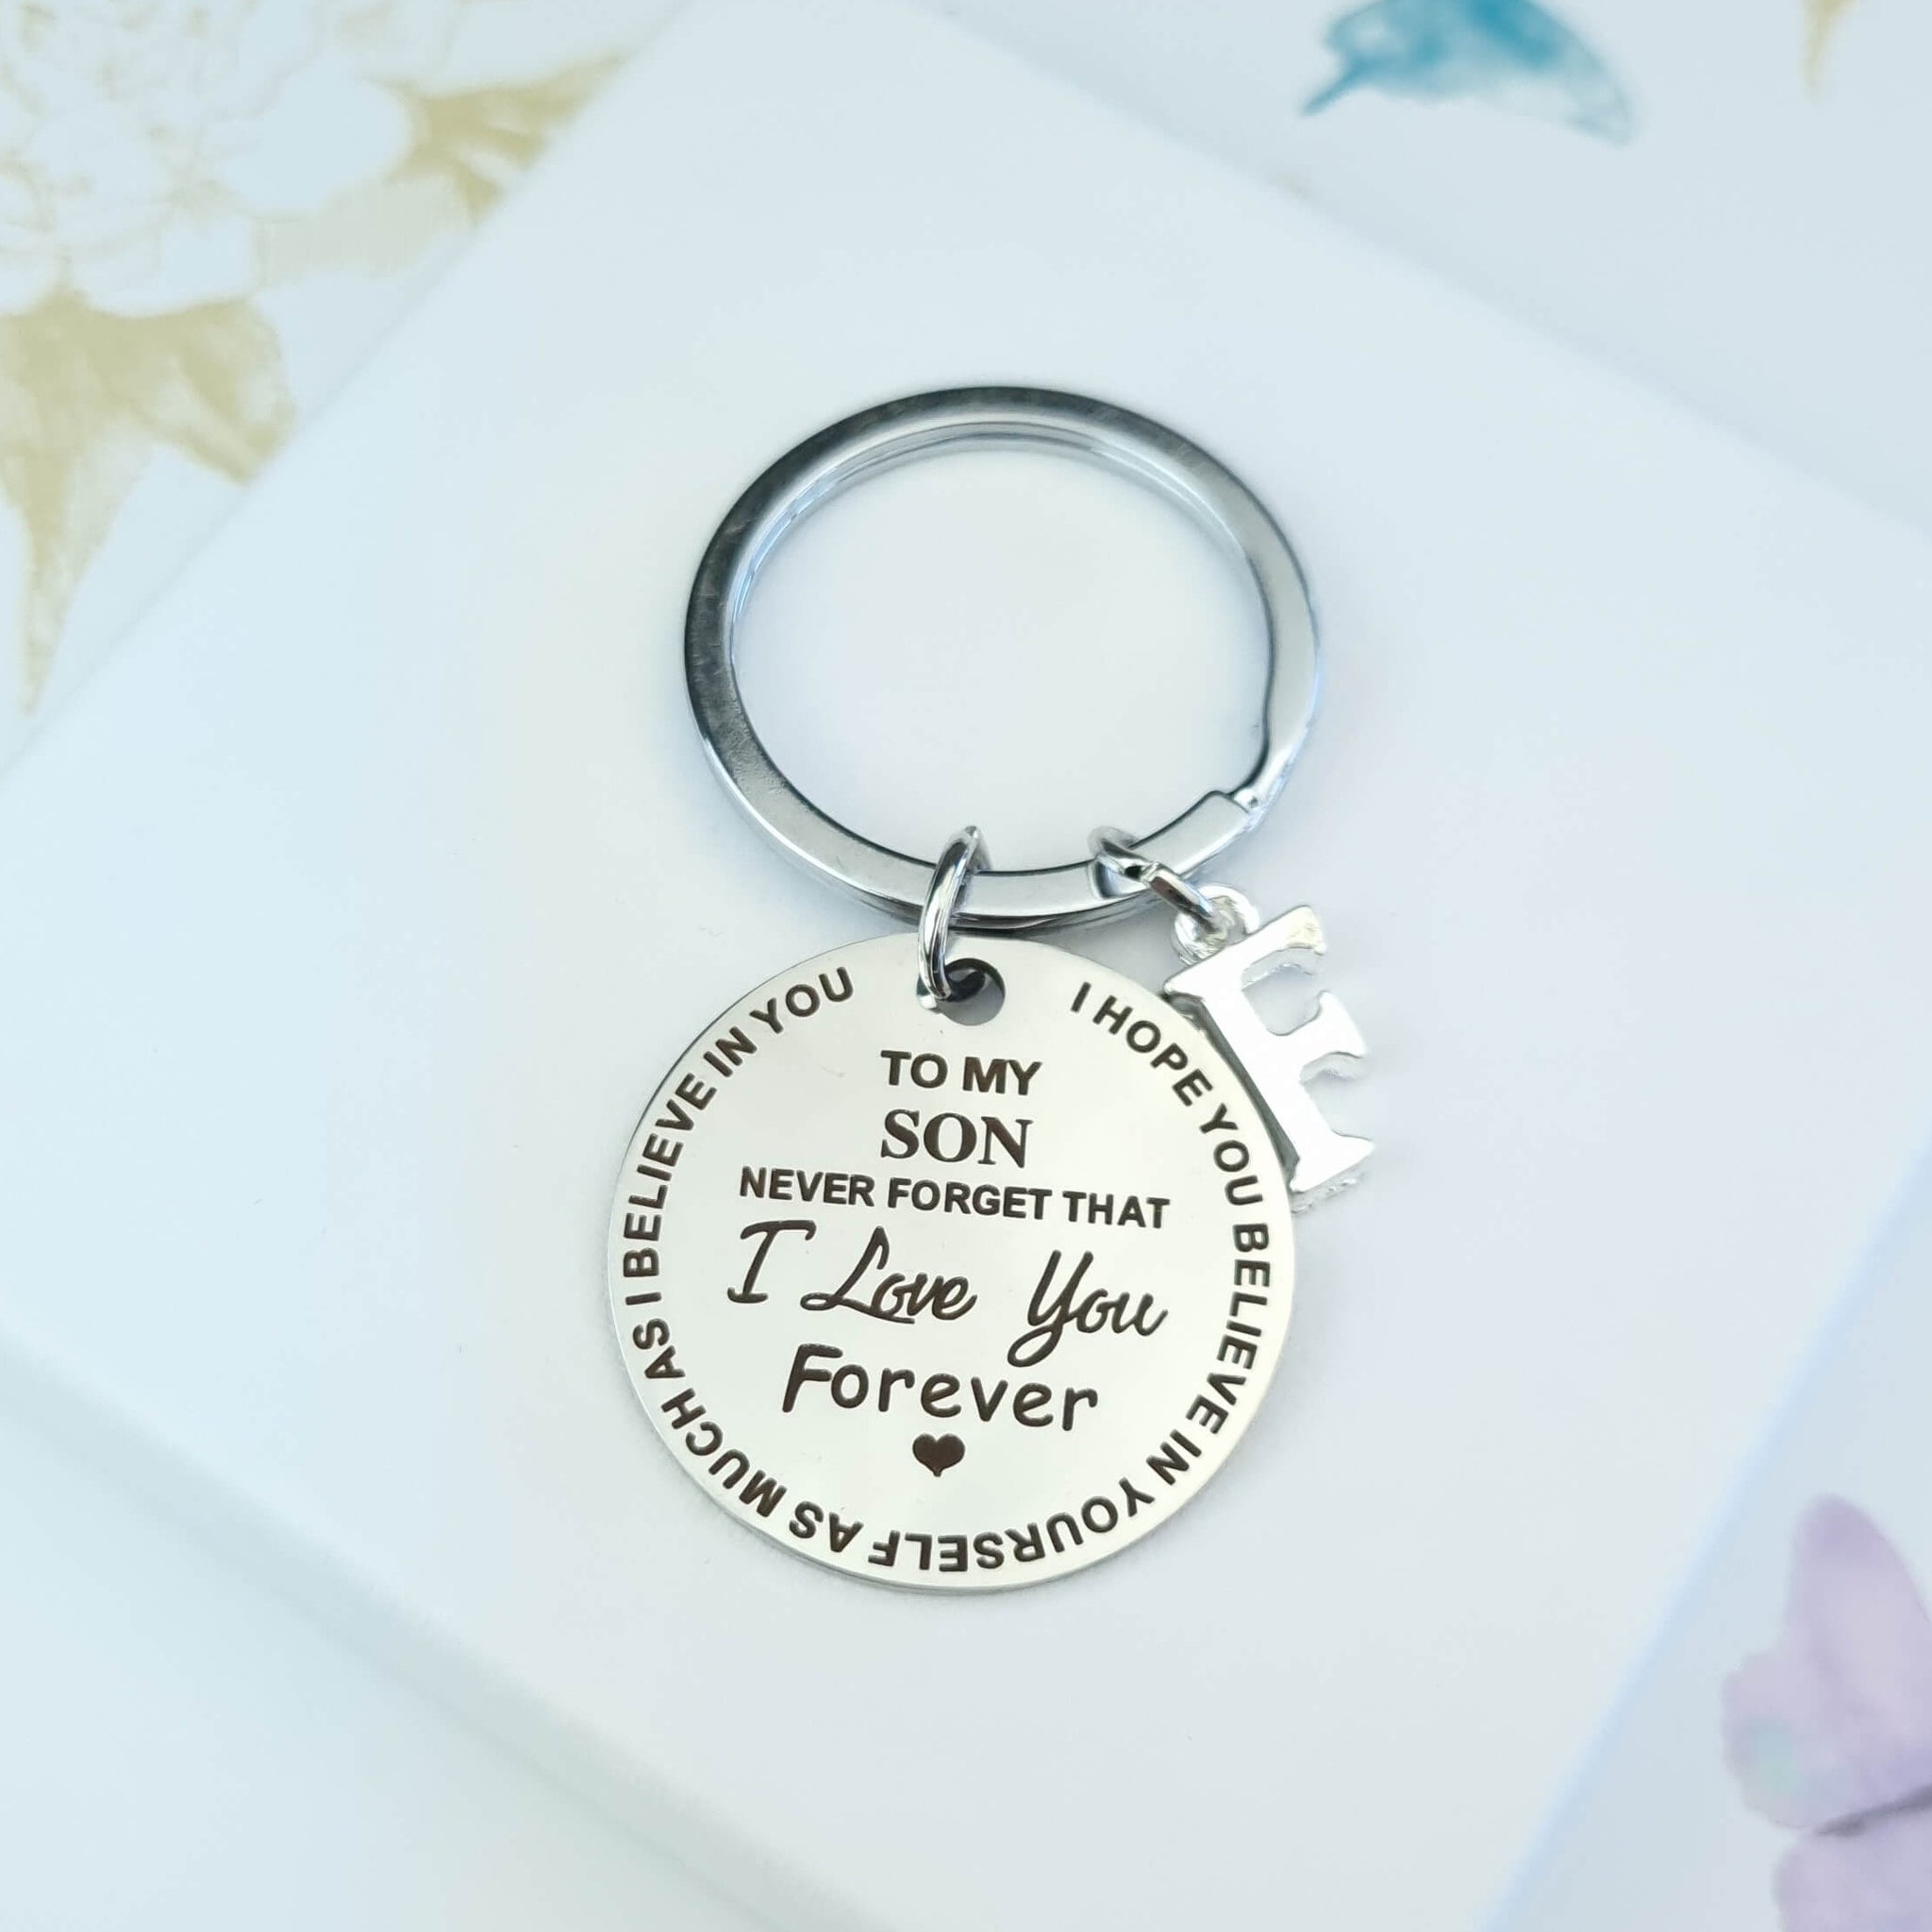 To my son personalised keyring